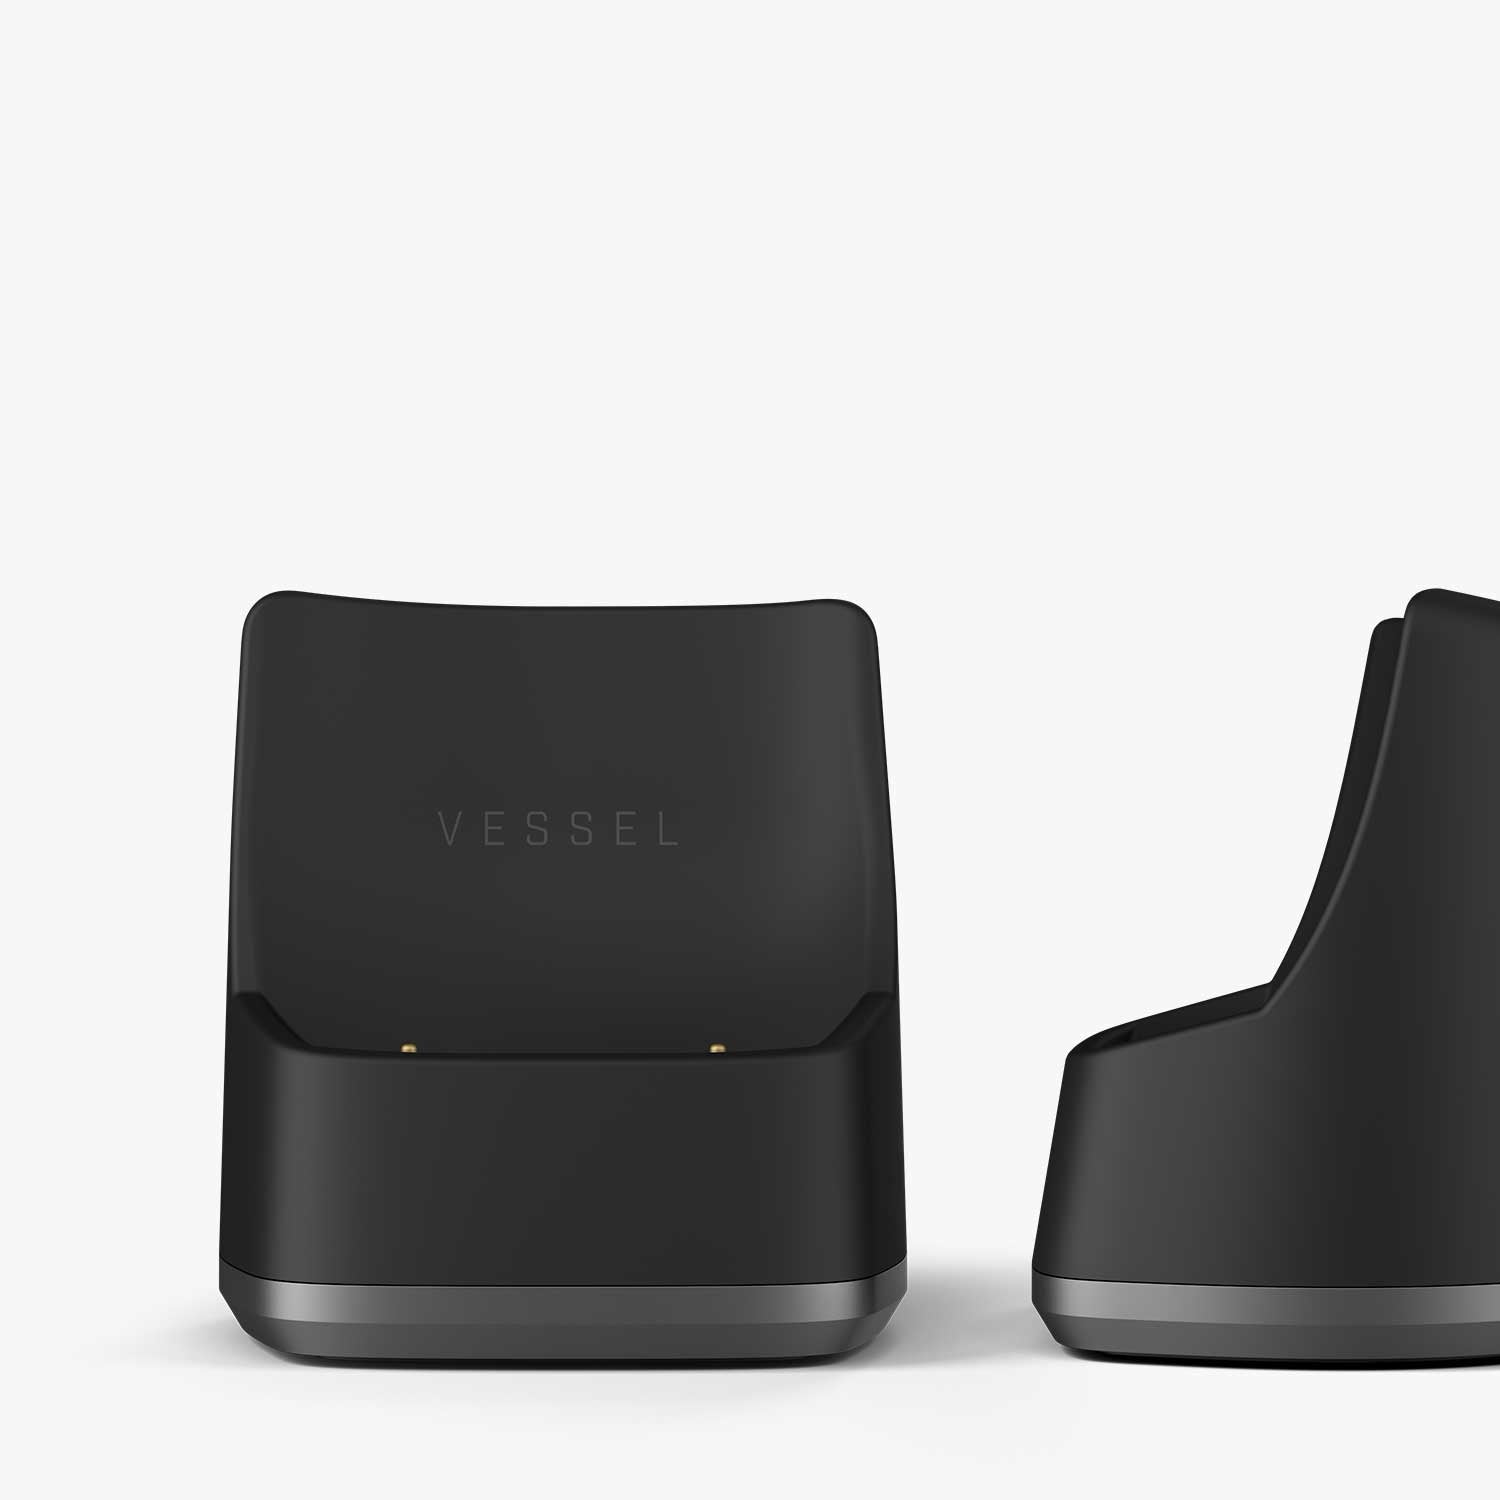 Vessel Charging Stands made exclusively for Vessel devices. Ridge Charger for Compass and Base Charger for all Pen-style devices.